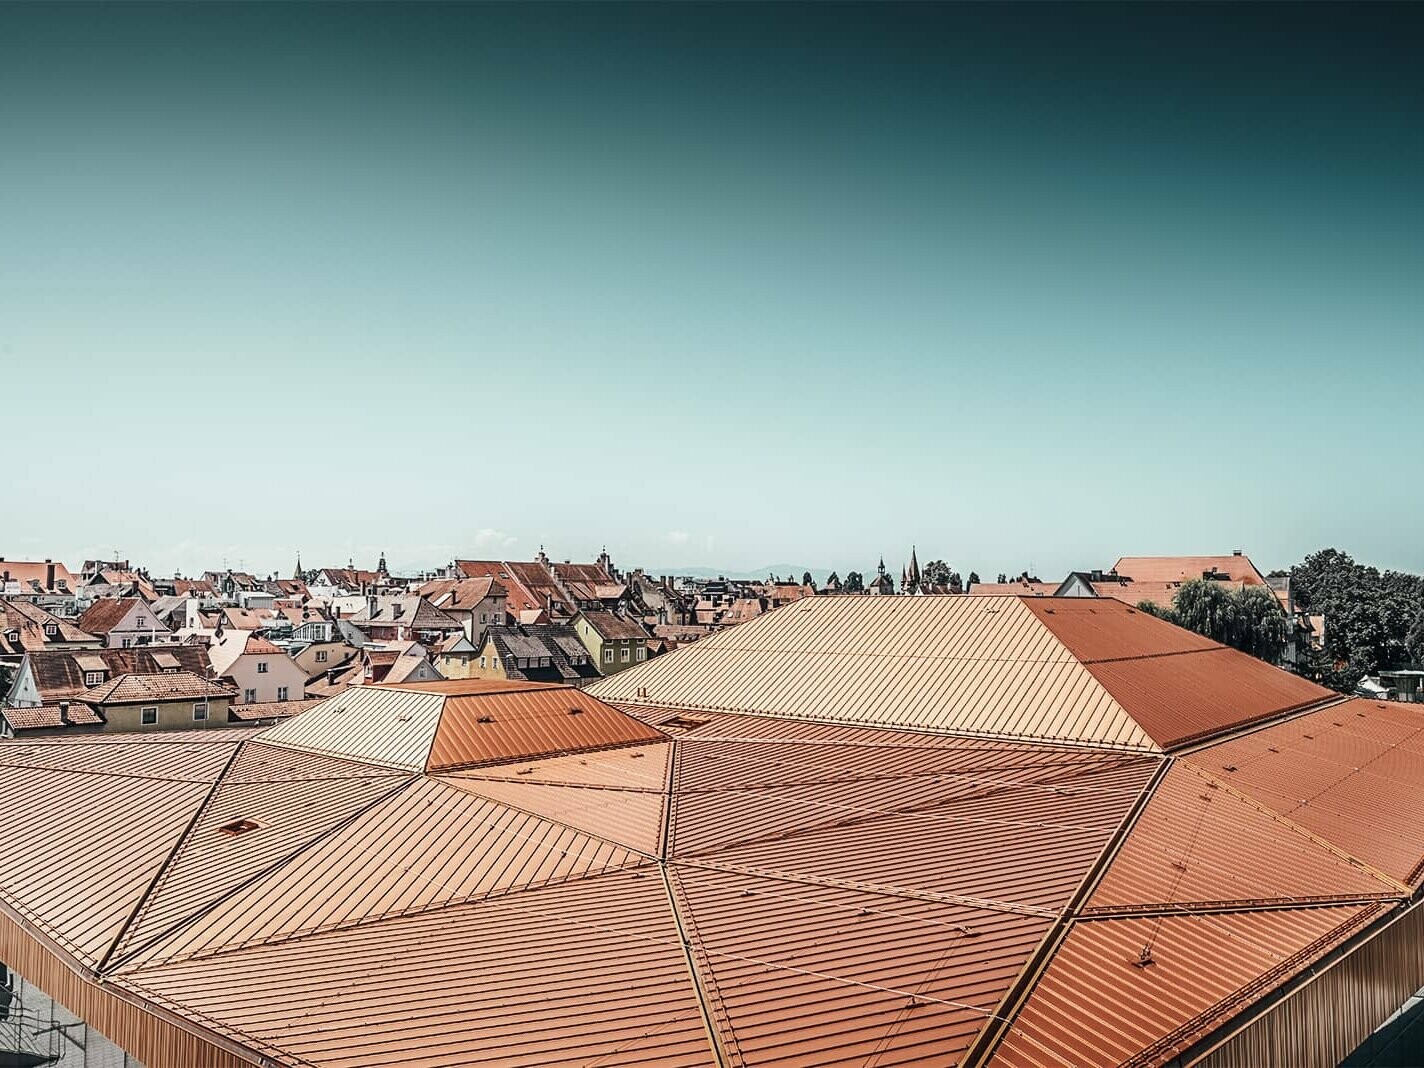 This picture shows a roof landscape of the "Inselhalle" in Lindau which is covered in Falzonal from PREFA in the colour red brown.